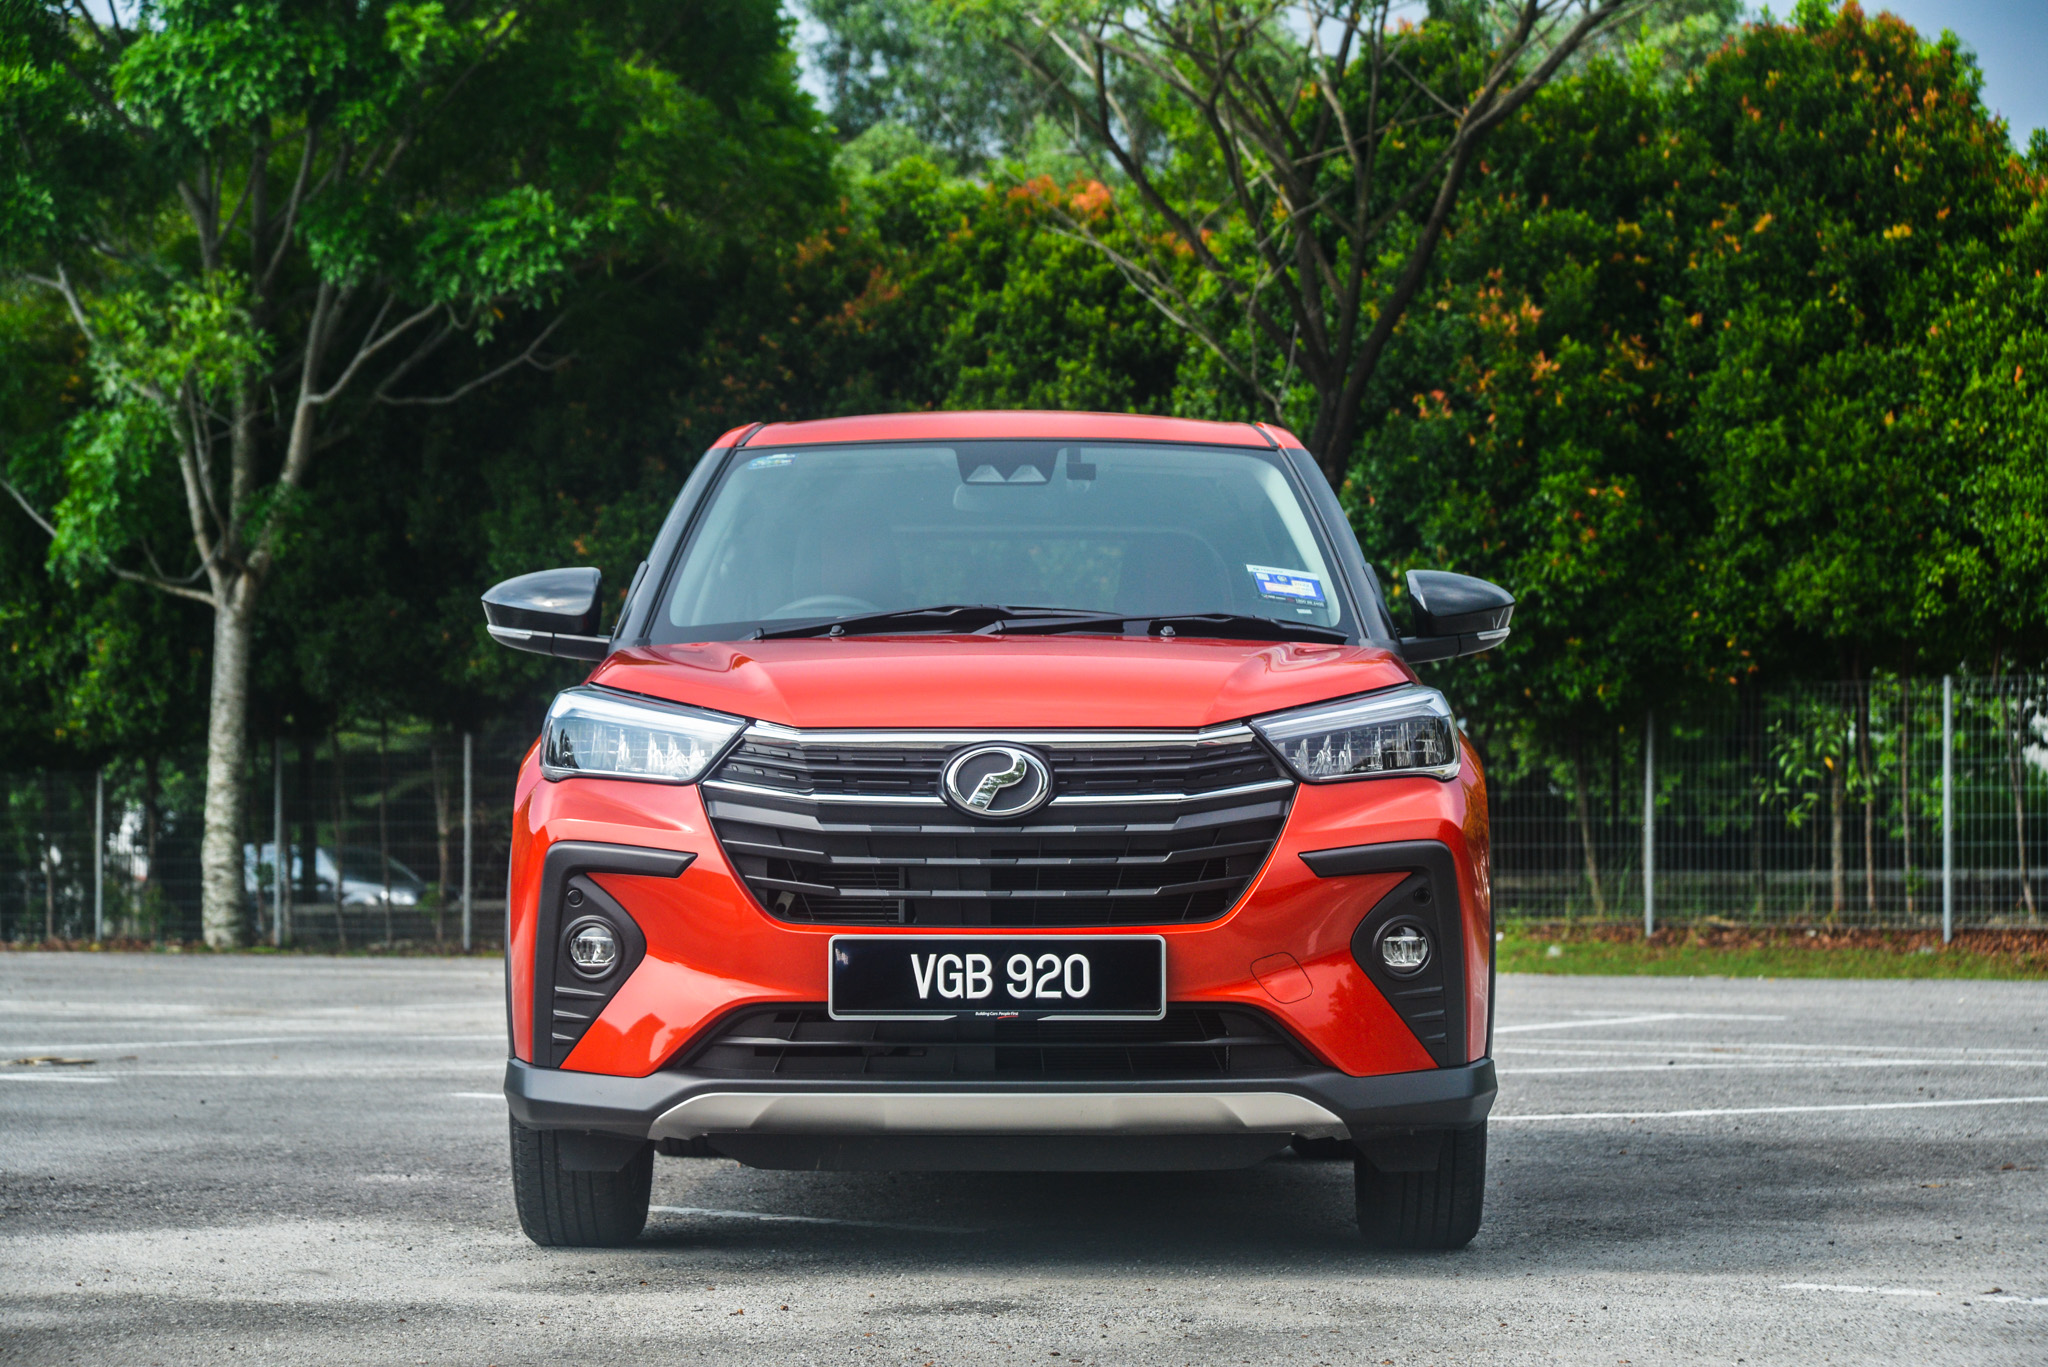 Topgear Ativa Tech Talk Perodua S Latest Compact Suv And Its Trifecta Of Firsts